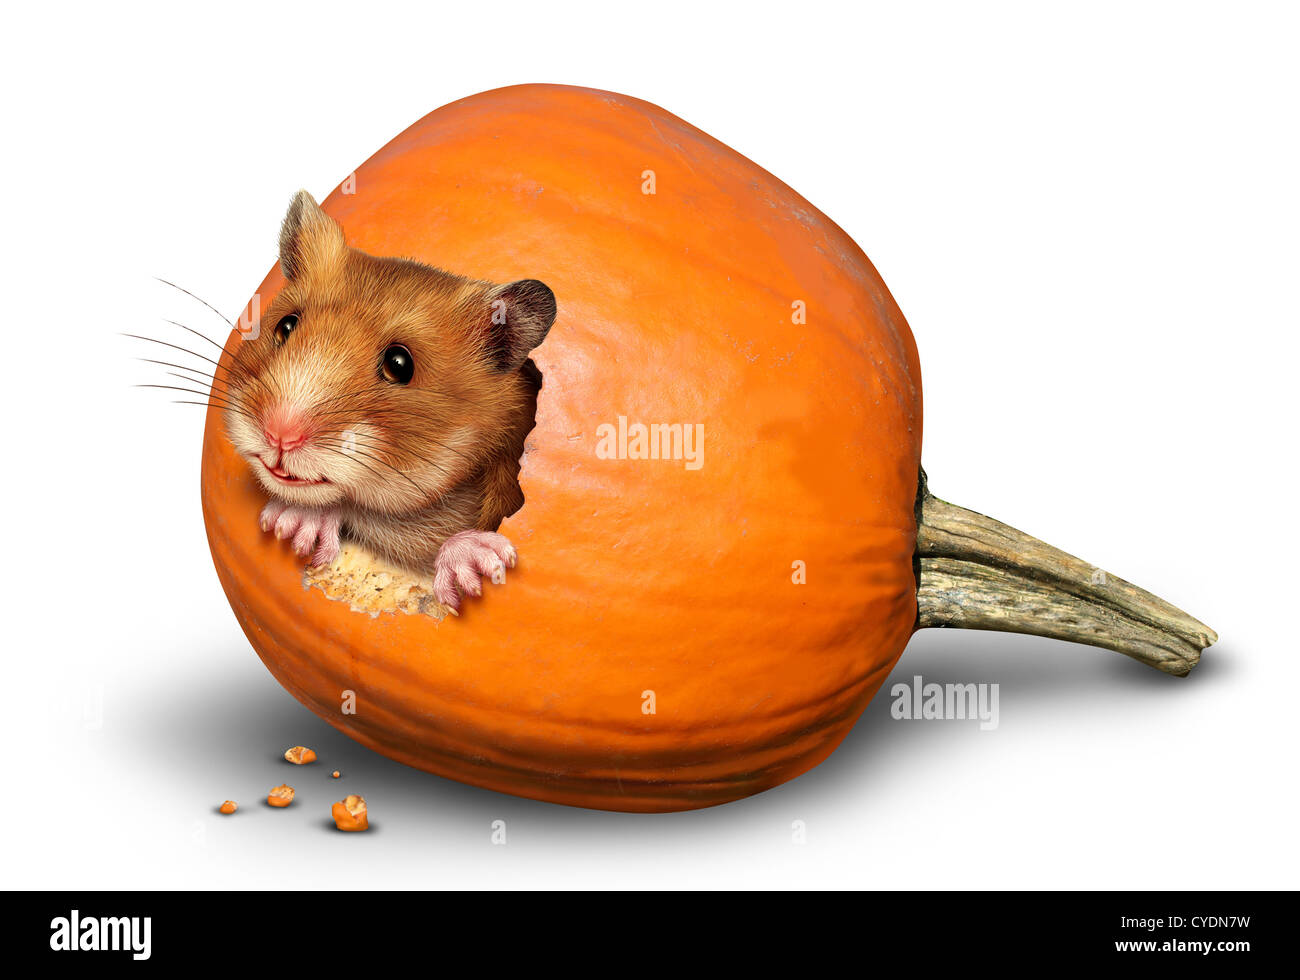 Thanksgiving harvest symbol with a fun mouse like rodent or pet hamster inside a hole of an eaten pumpkin on a white background Stock Photo